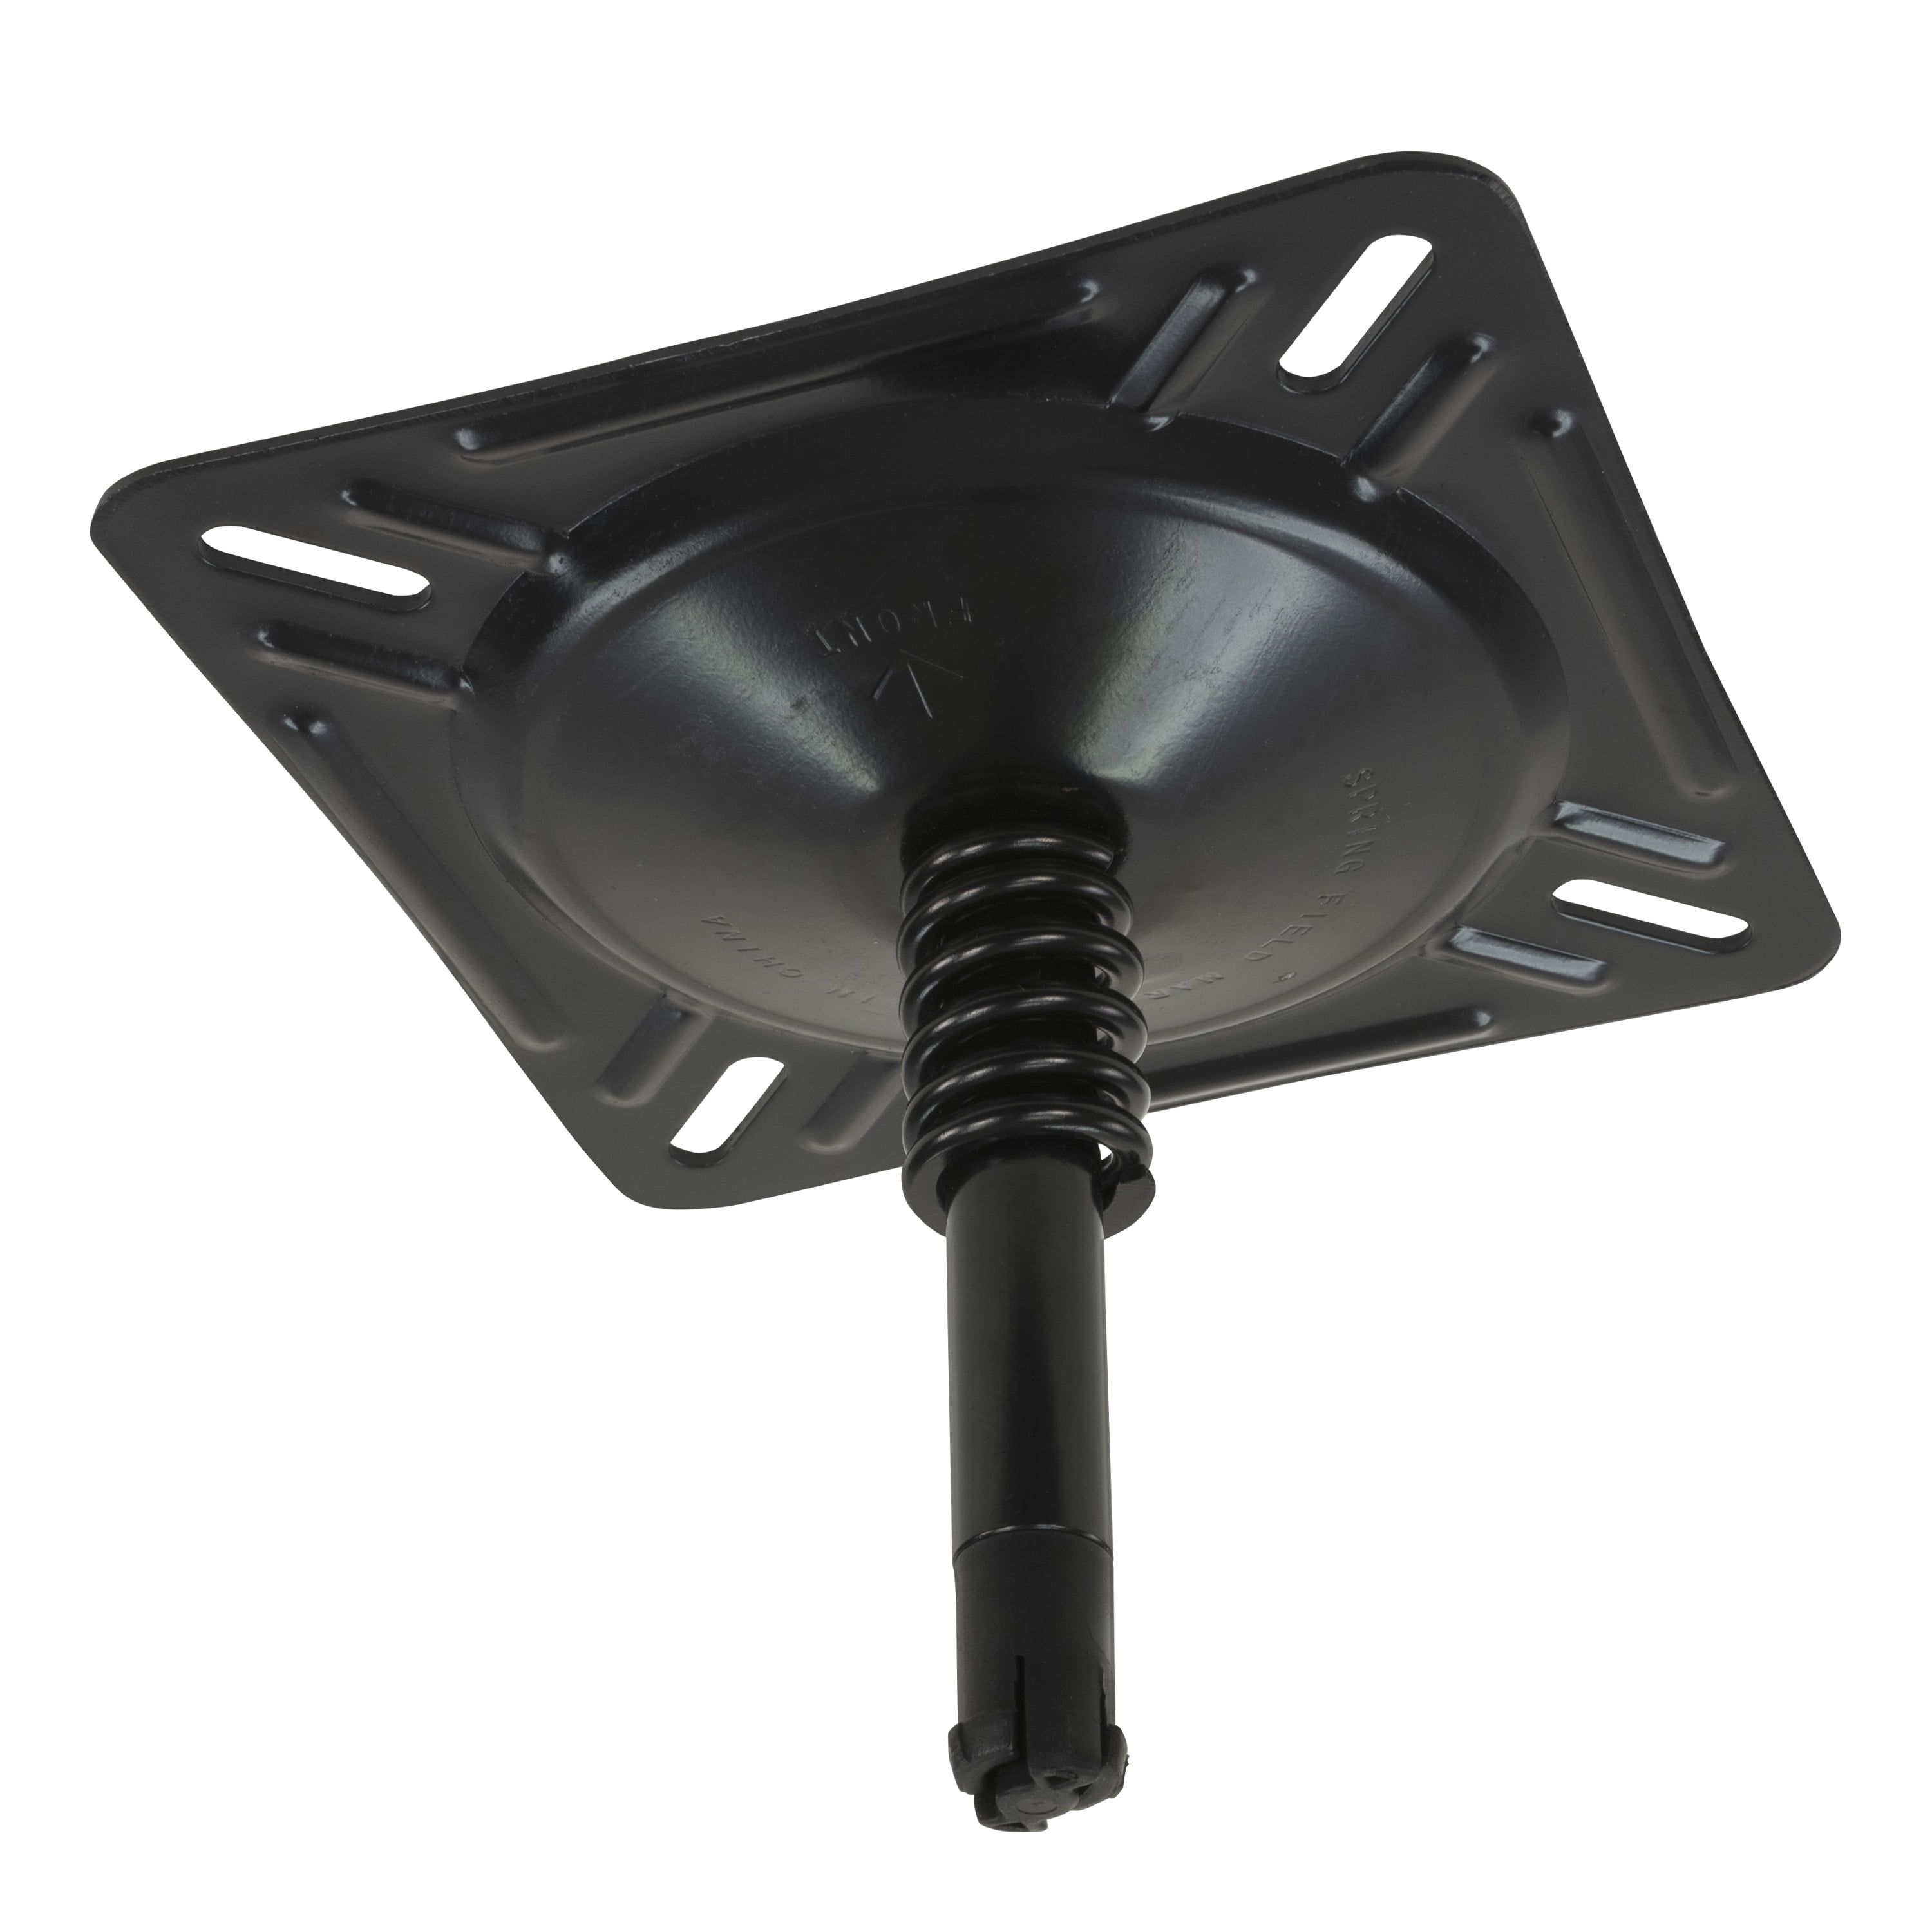 Springfield Marine Kingpin Swivel Boat Seat Mount with Spring for Boat Seat - 7 inch x 7 inch